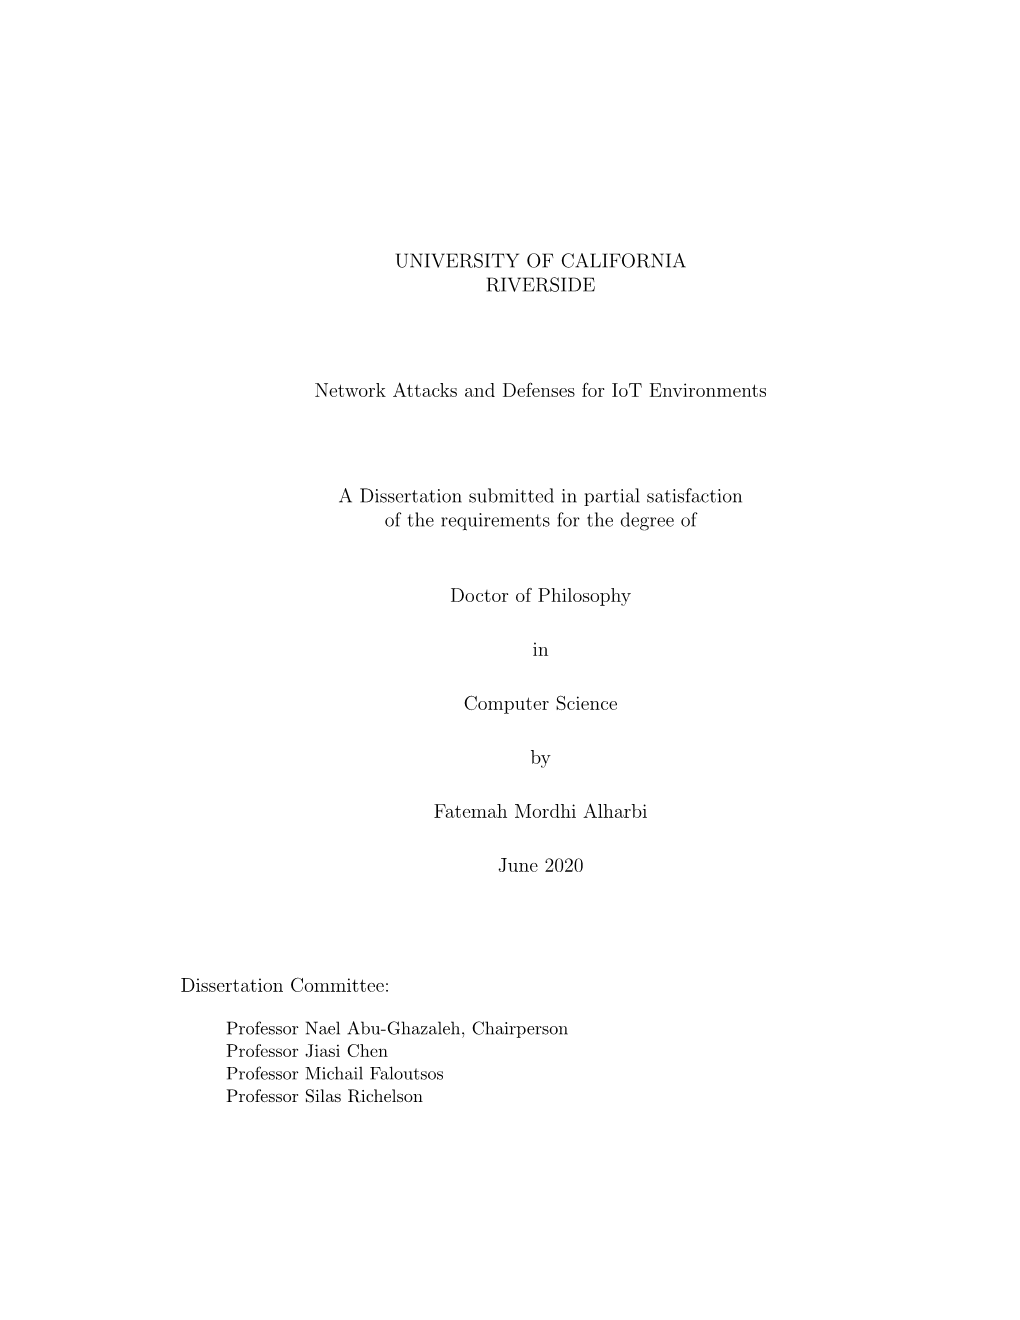 UNIVERSITY of CALIFORNIA RIVERSIDE Network Attacks and Defenses for Iot Environments a Dissertation Submitted in Partial Satisfa